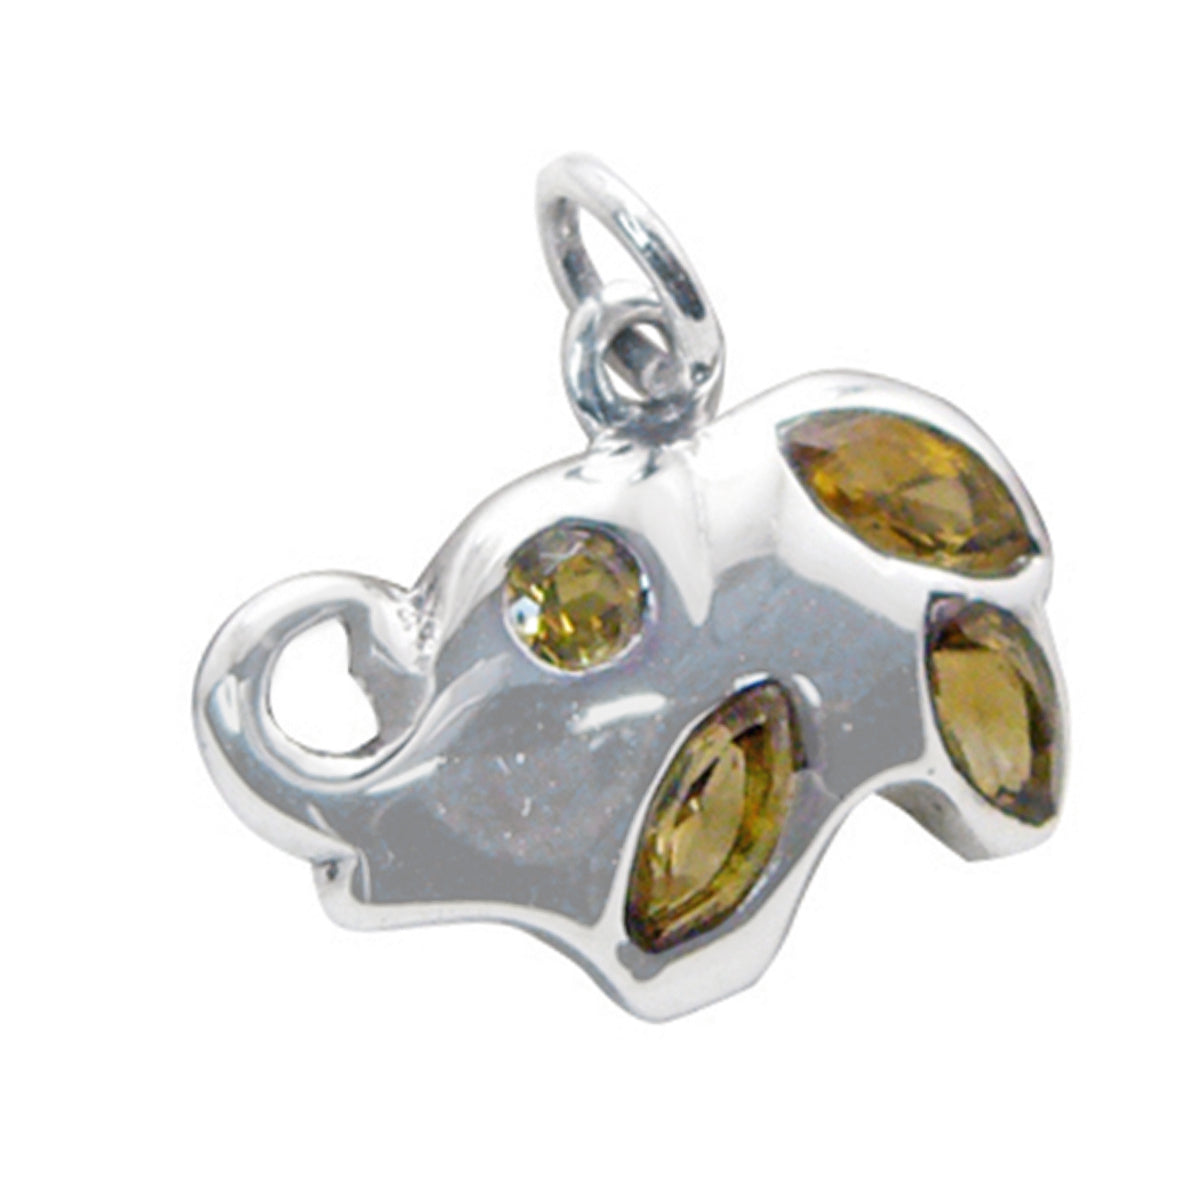 Riyo Handsome Gemstone Multi Faceted Yellow Citrine 1067 Sterling Silver Pendant Gift For Teachers Day